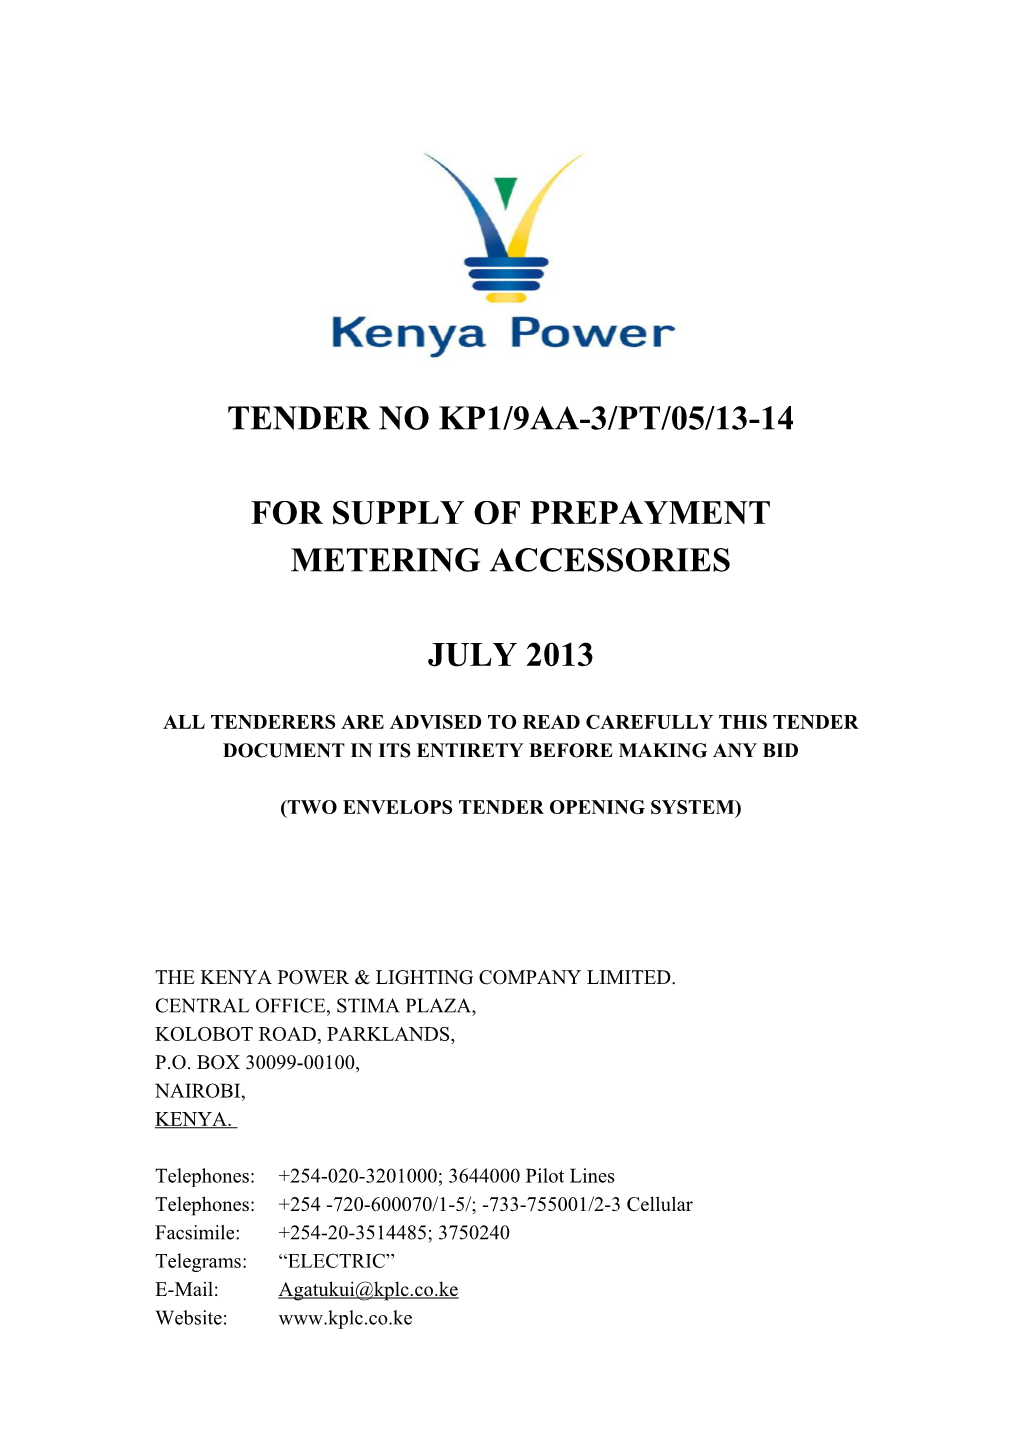 For Supply of Prepayment Metering Accessories